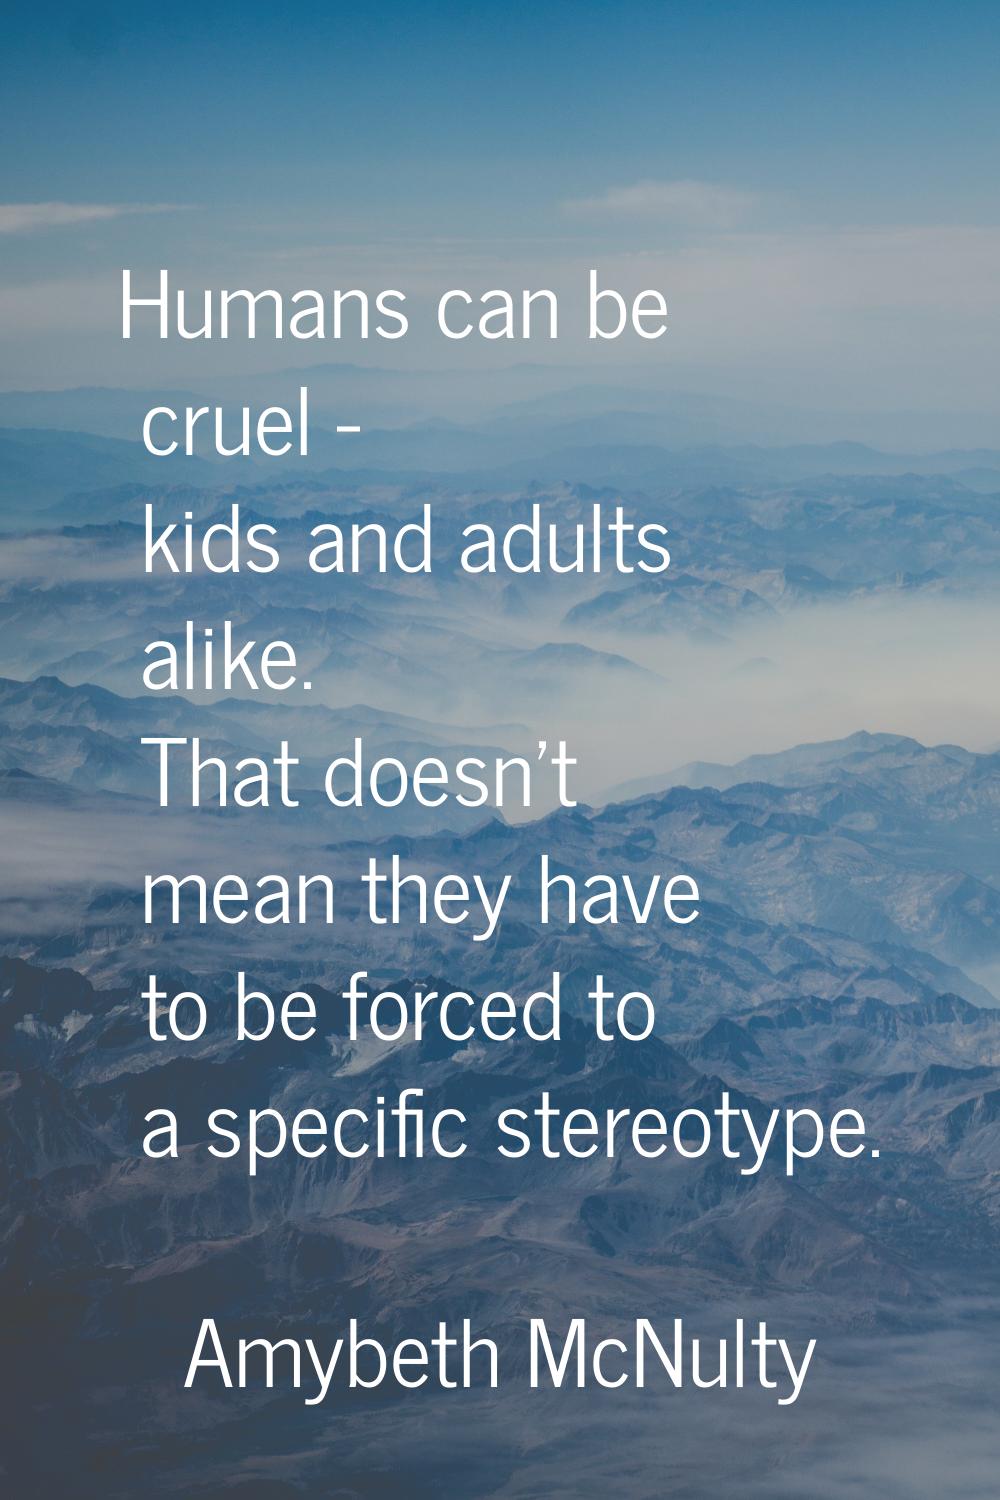 Humans can be cruel - kids and adults alike. That doesn't mean they have to be forced to a specific